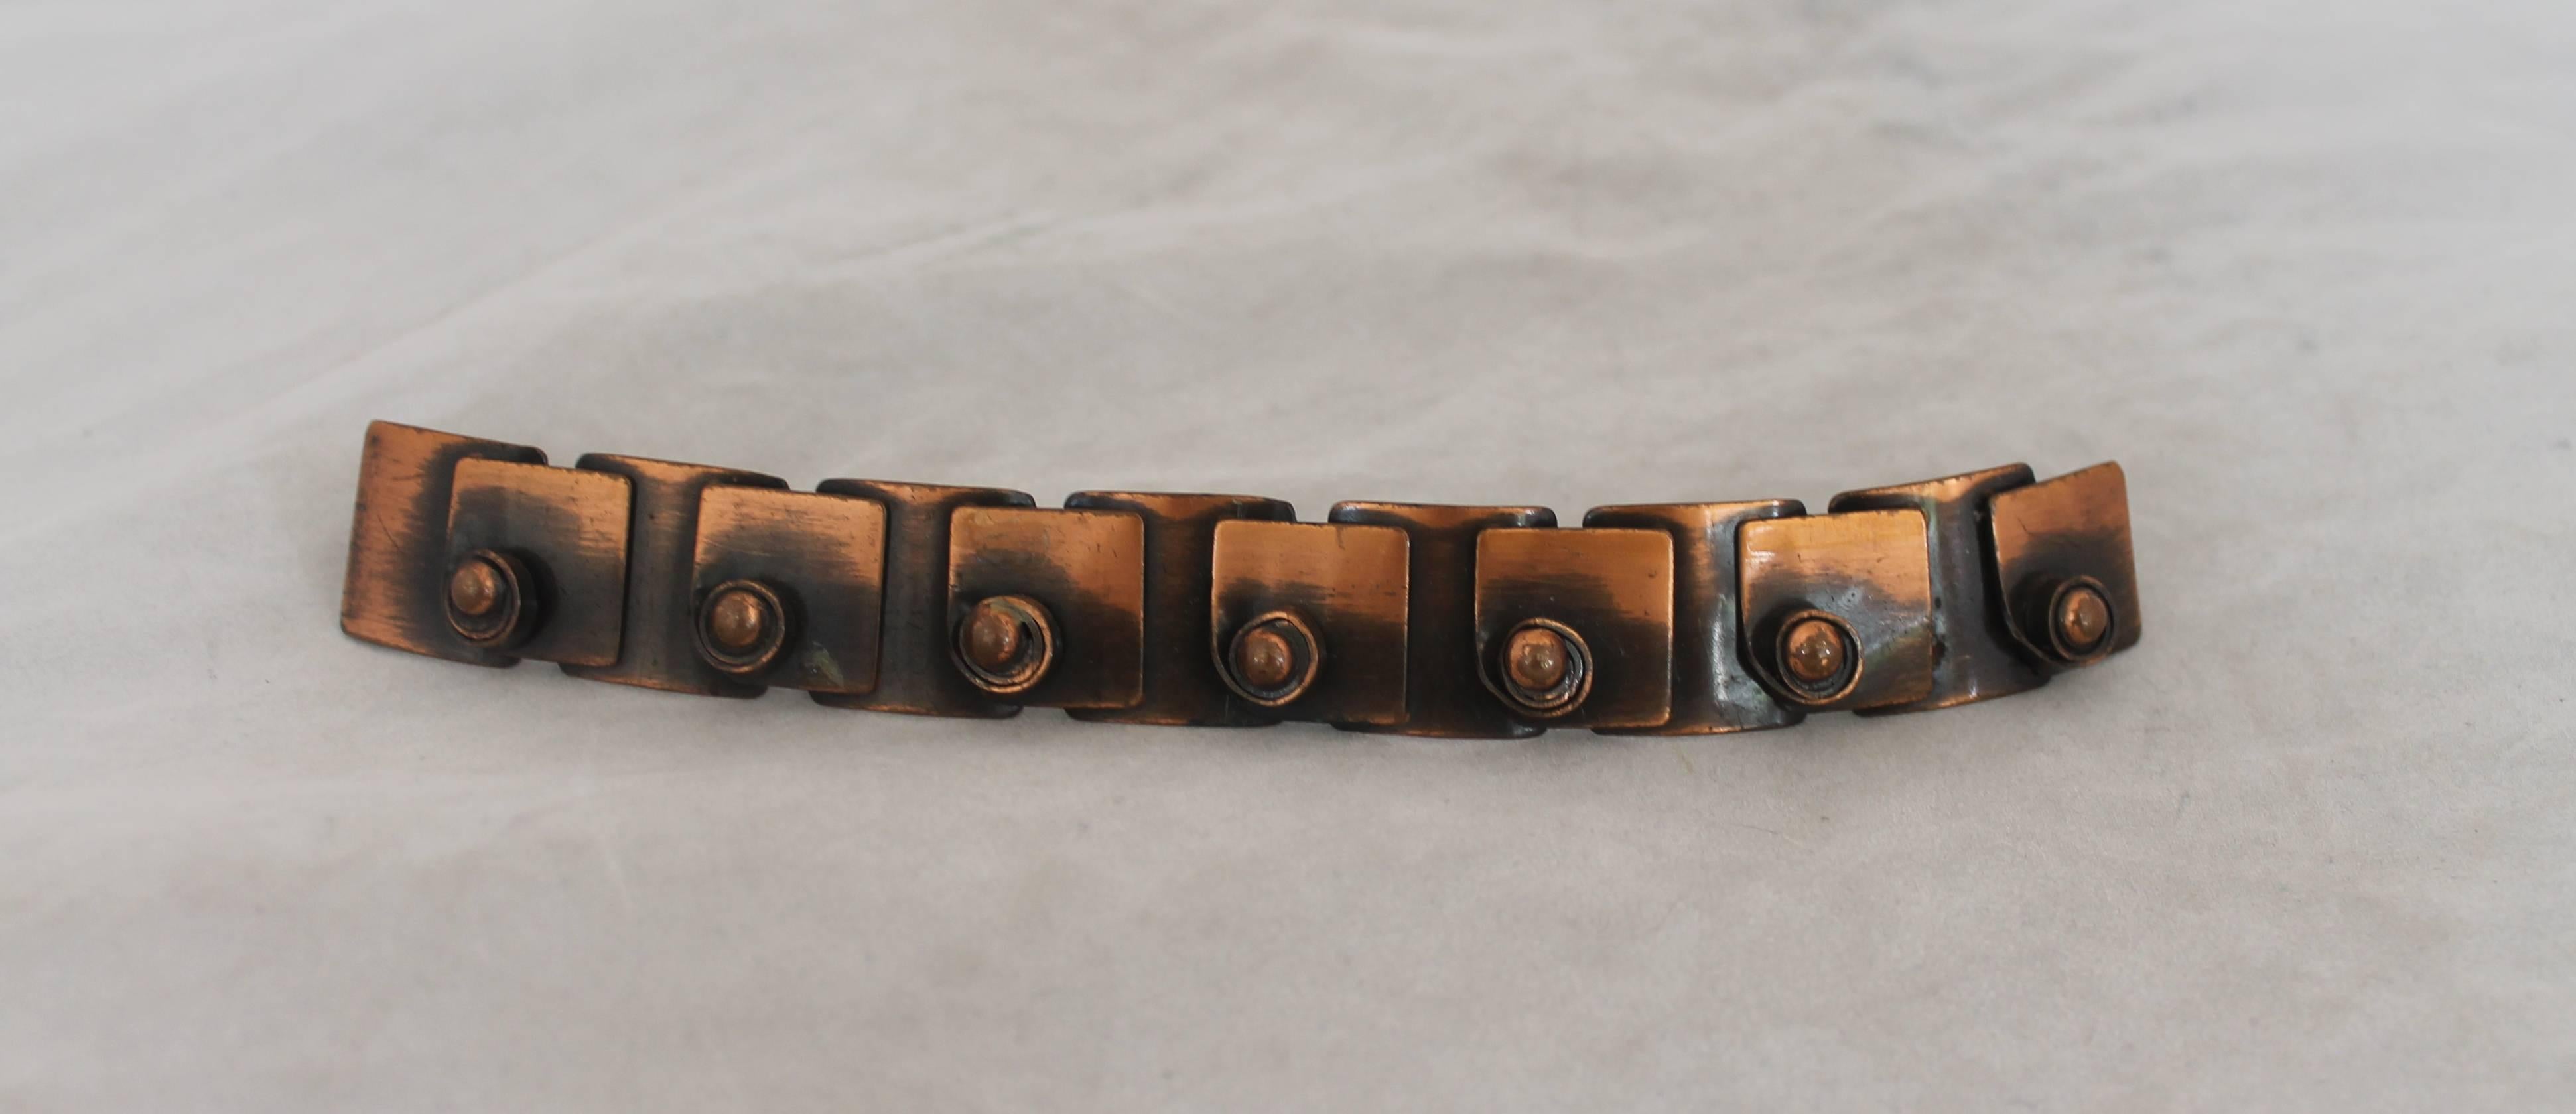 Rebajes Vintage Copper Geometric Link Bracelet - circa 1940's. This bracelet is in fair vintage condition with tarnishing consistent with the piece's age. The links are composed of squares with other squares on top of them and a small 3-D circle